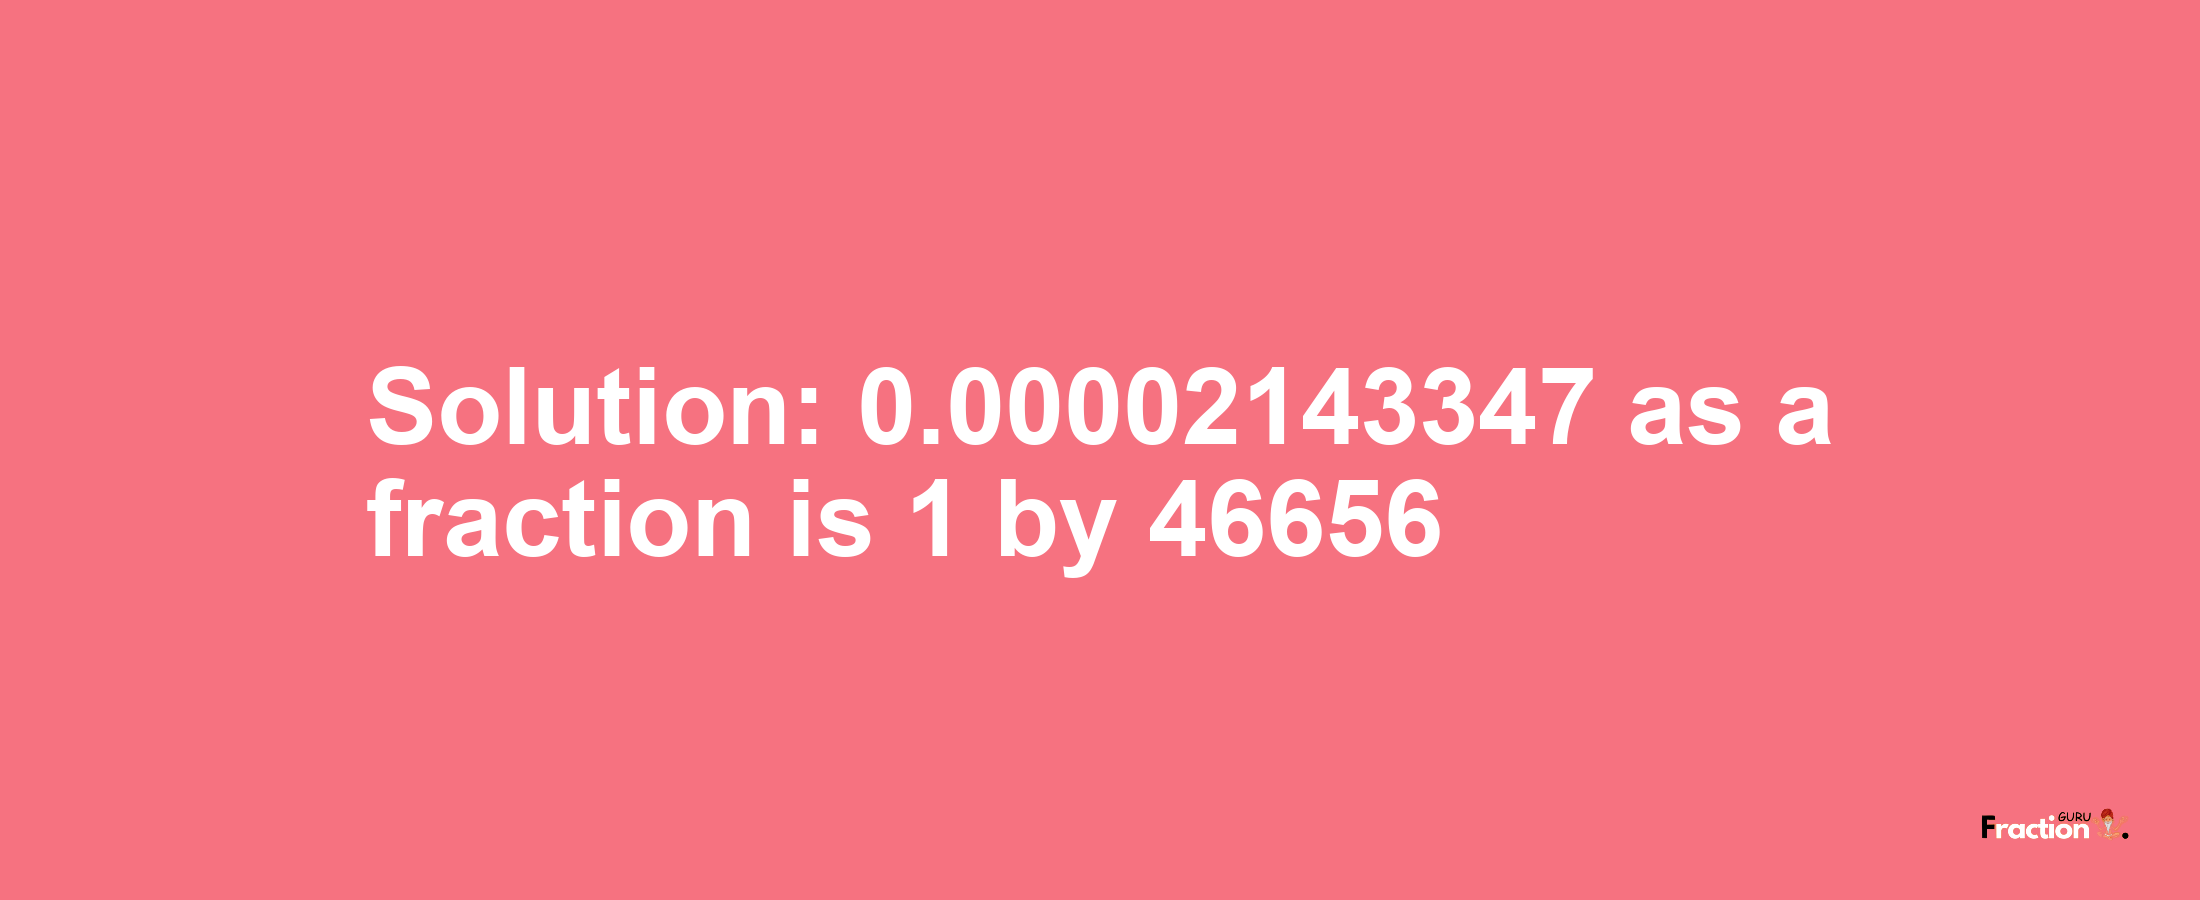 Solution:0.00002143347 as a fraction is 1/46656